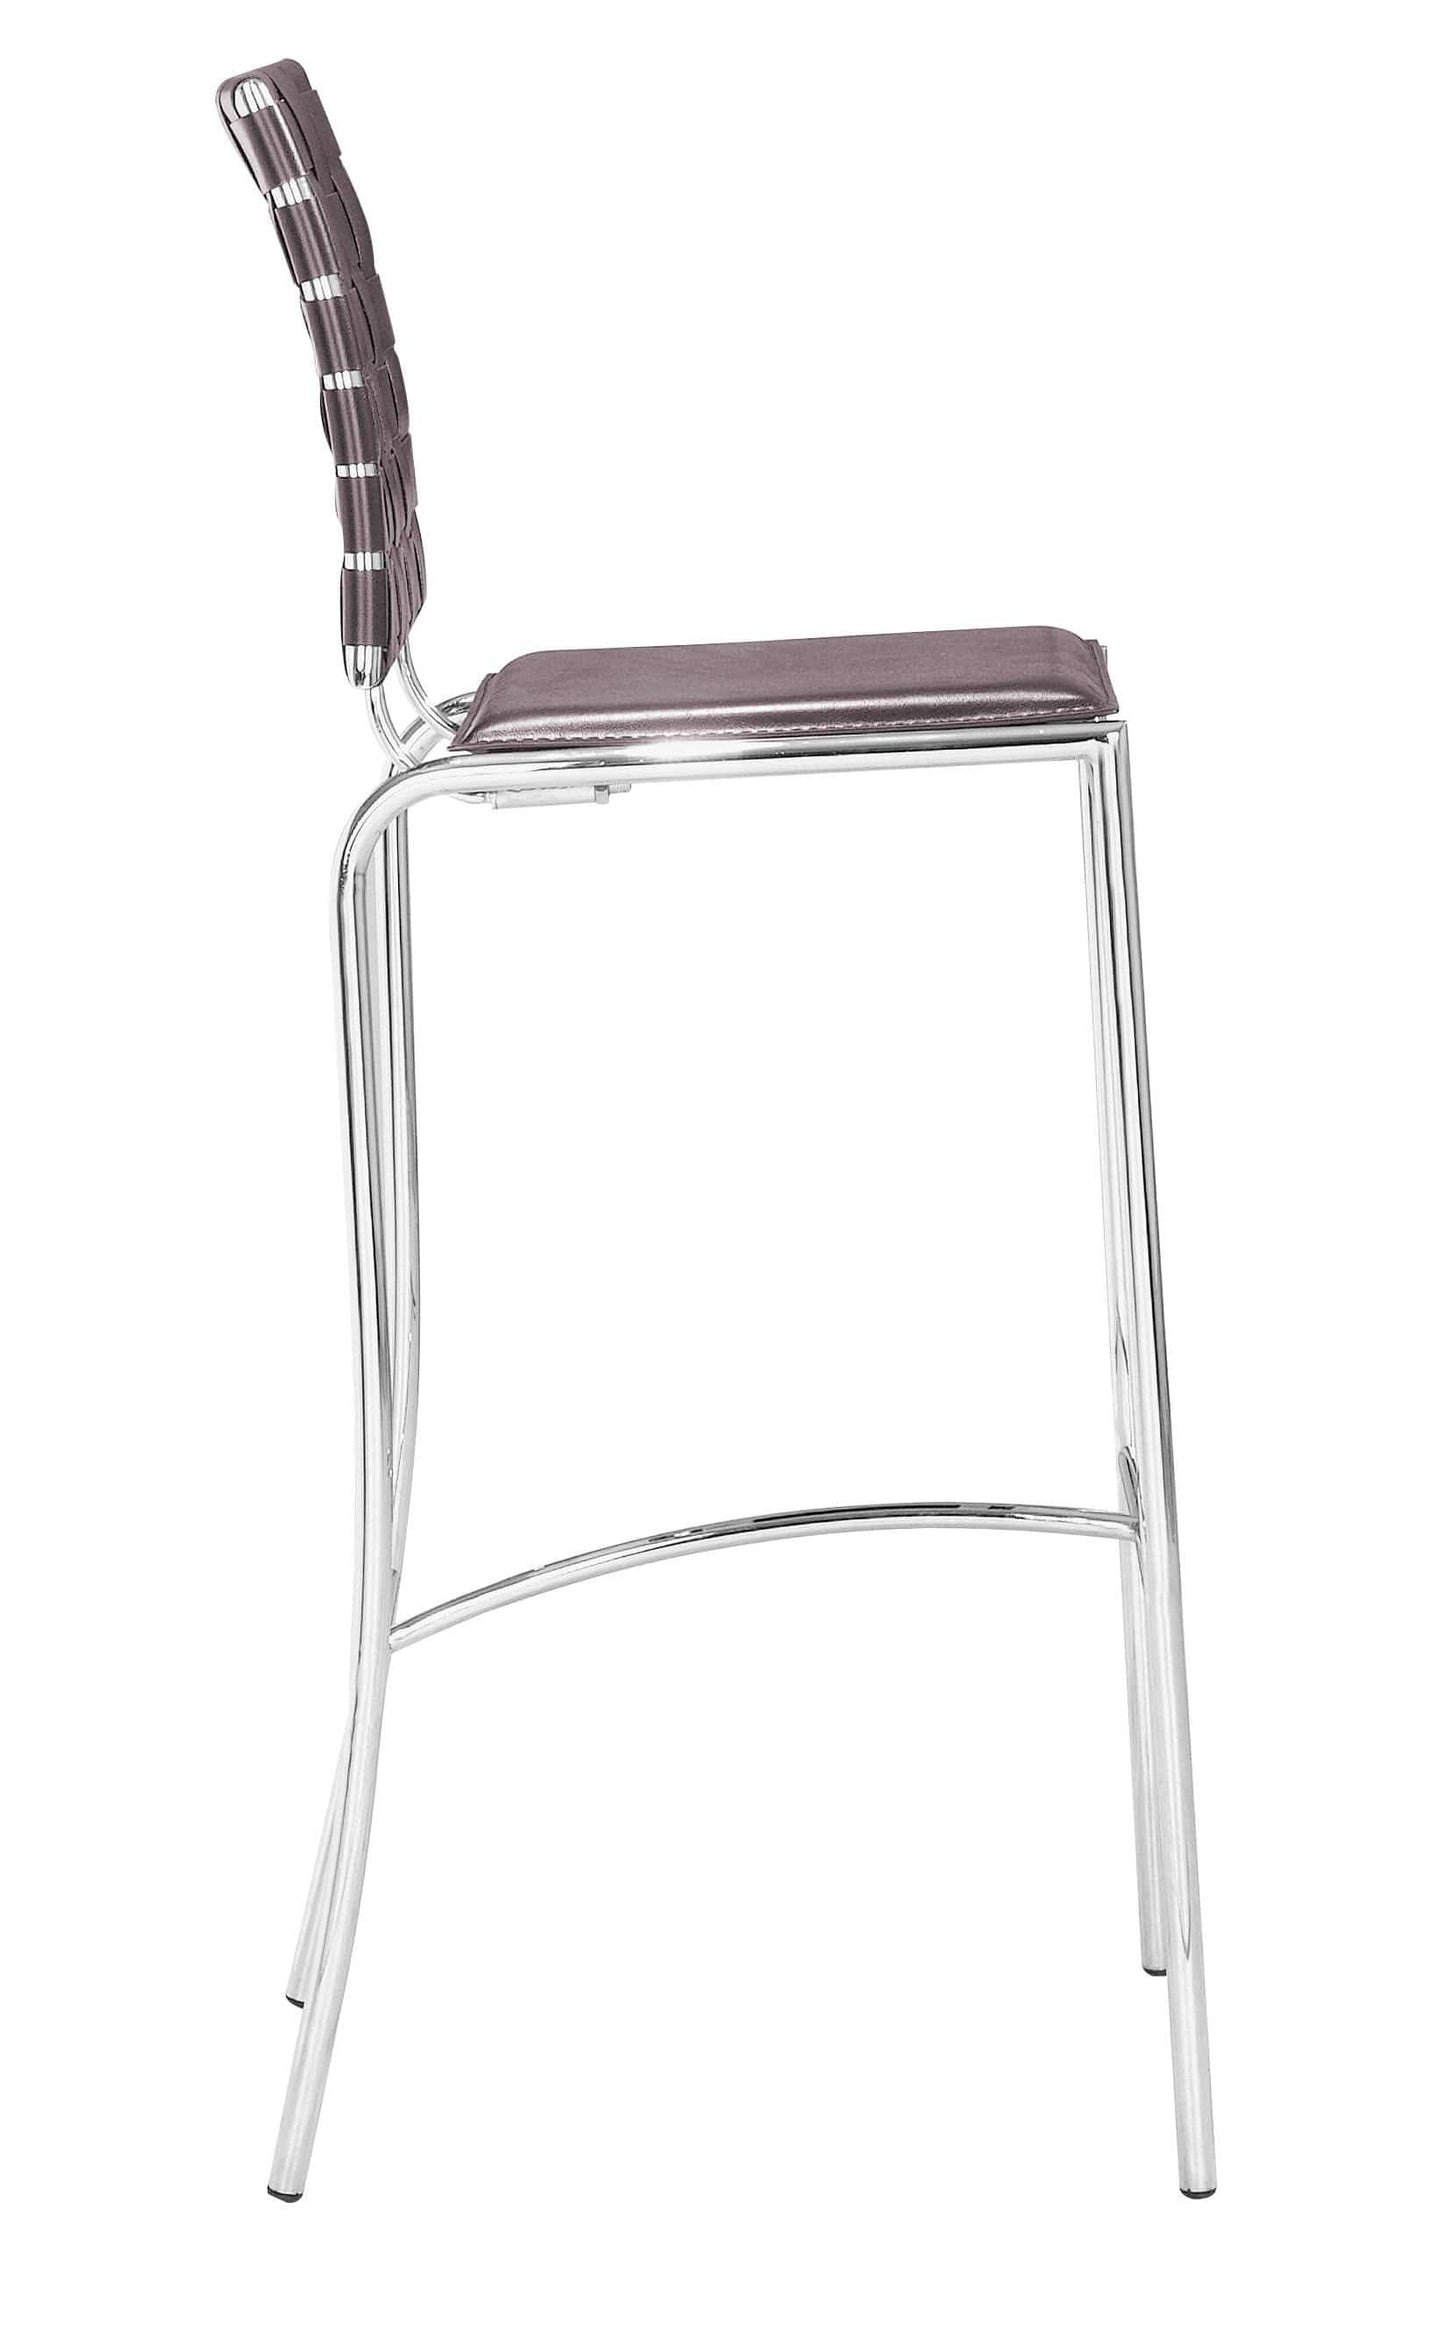 Side View of hospitality grade stool